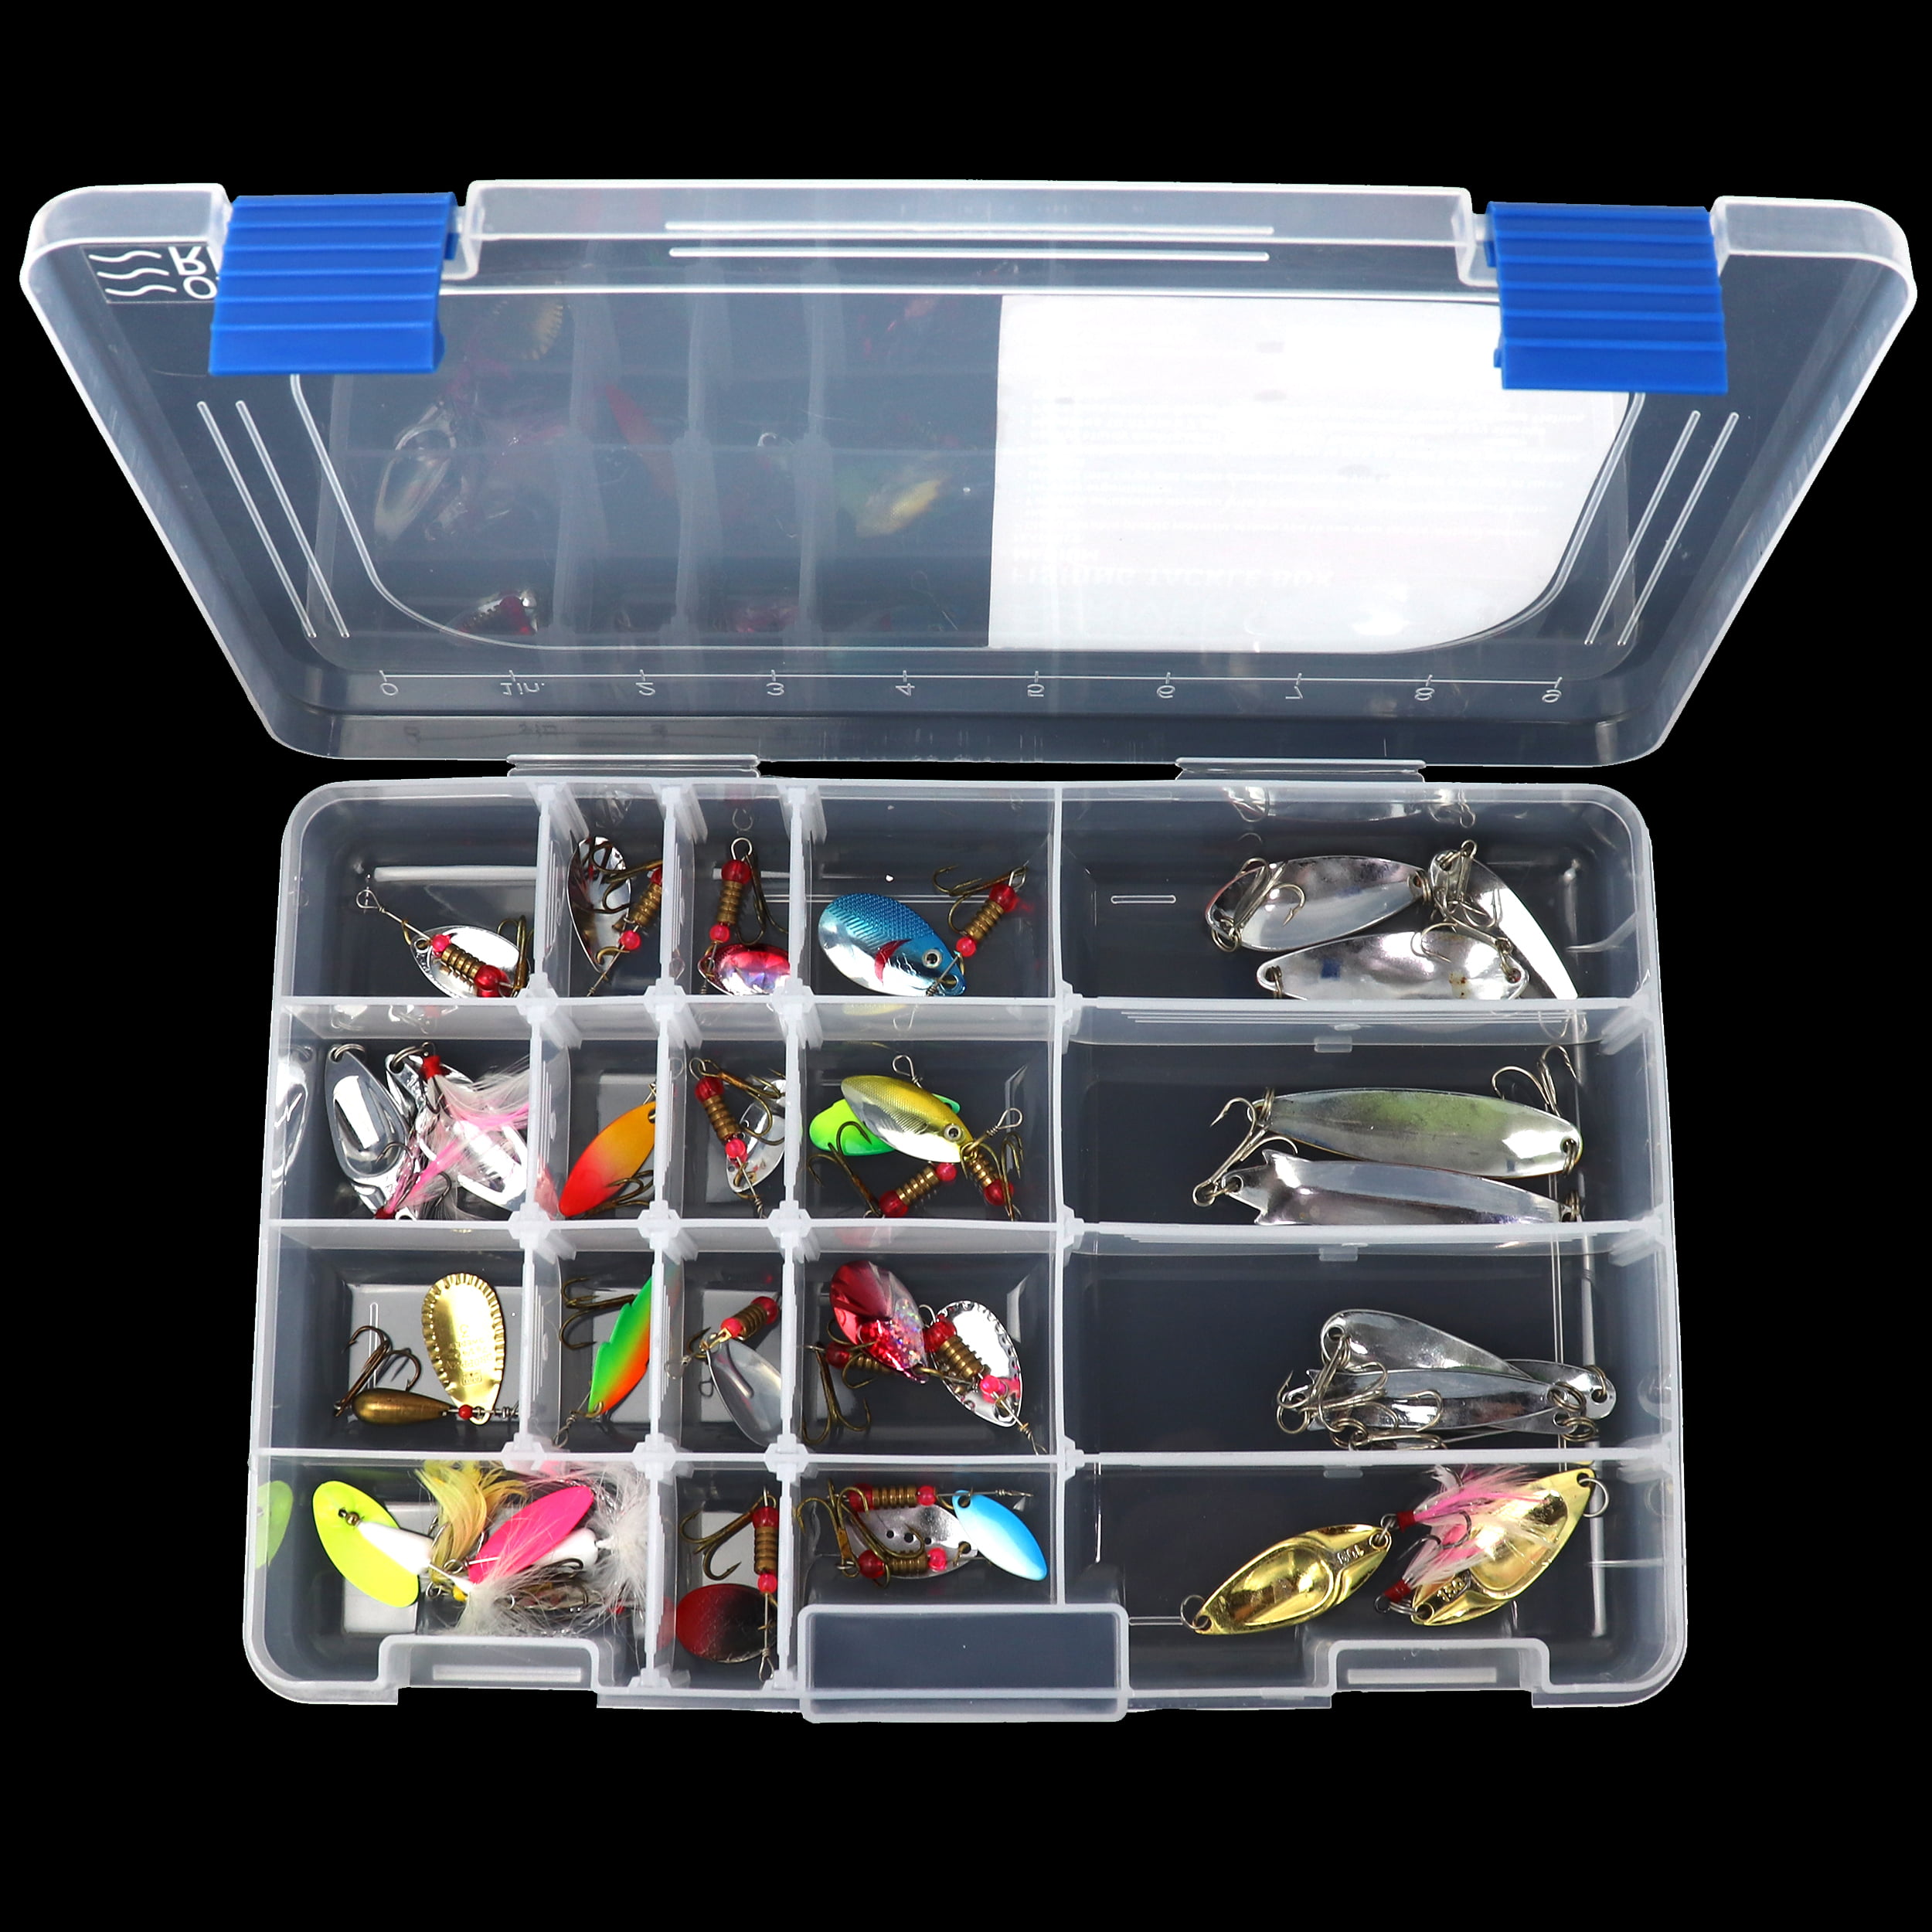 Osage River Medium Tackle Box Organizer, Clear Plastic Fishing Tackle Storage Tray with Adjustable Dividers, 1 Pack